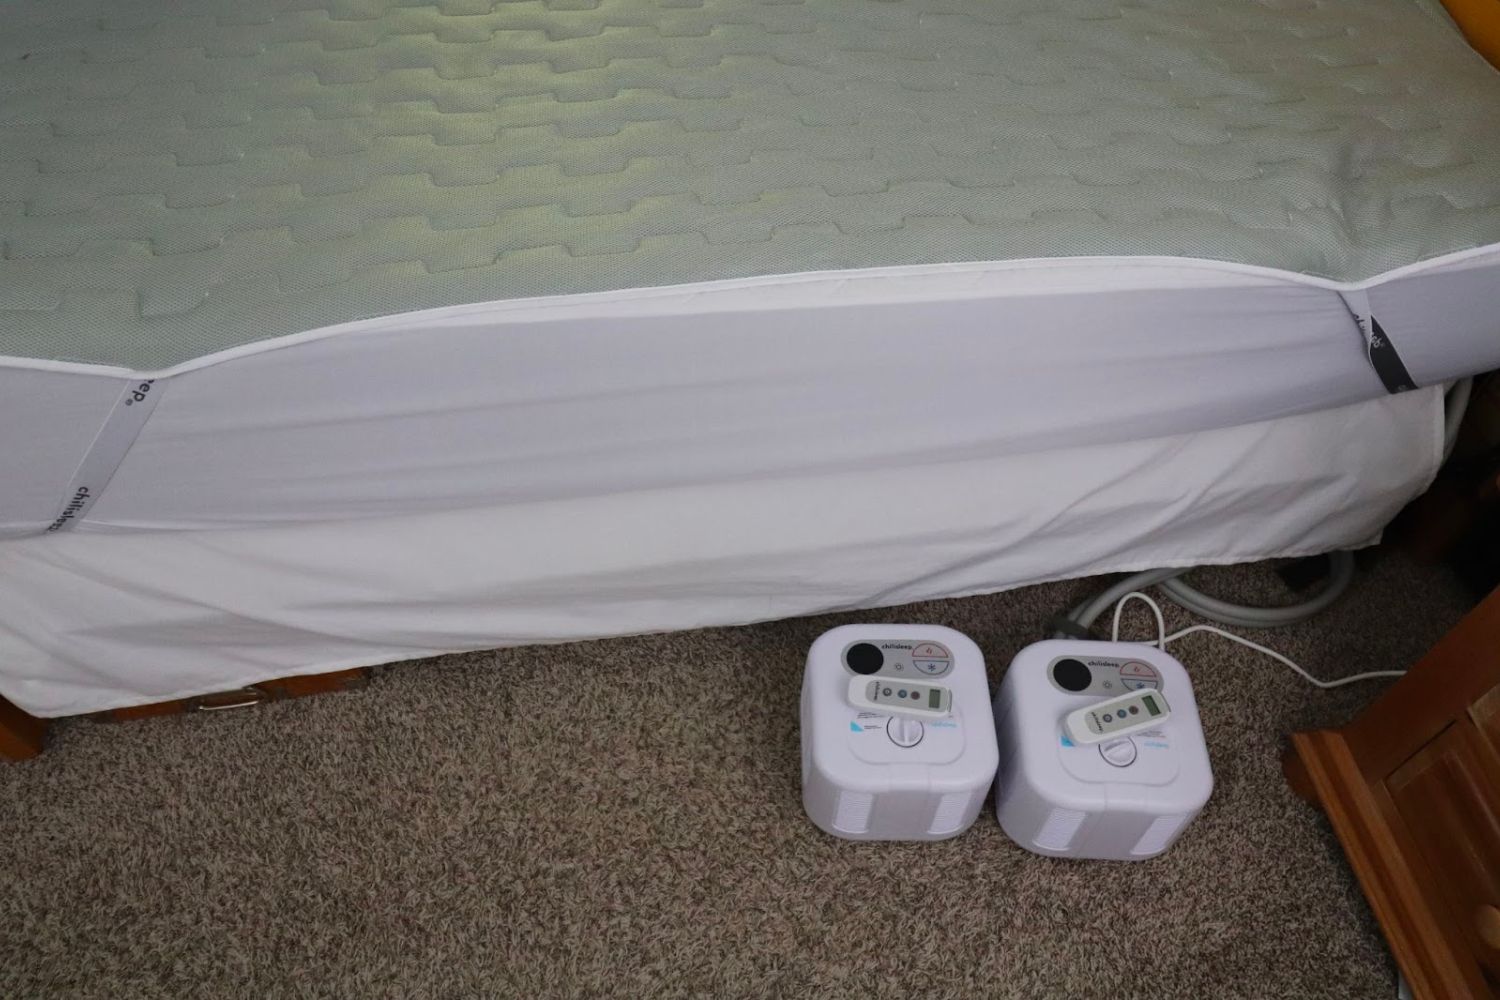 The cubes of the Chilipad Sleep System on a carpeted floor next to a bed.